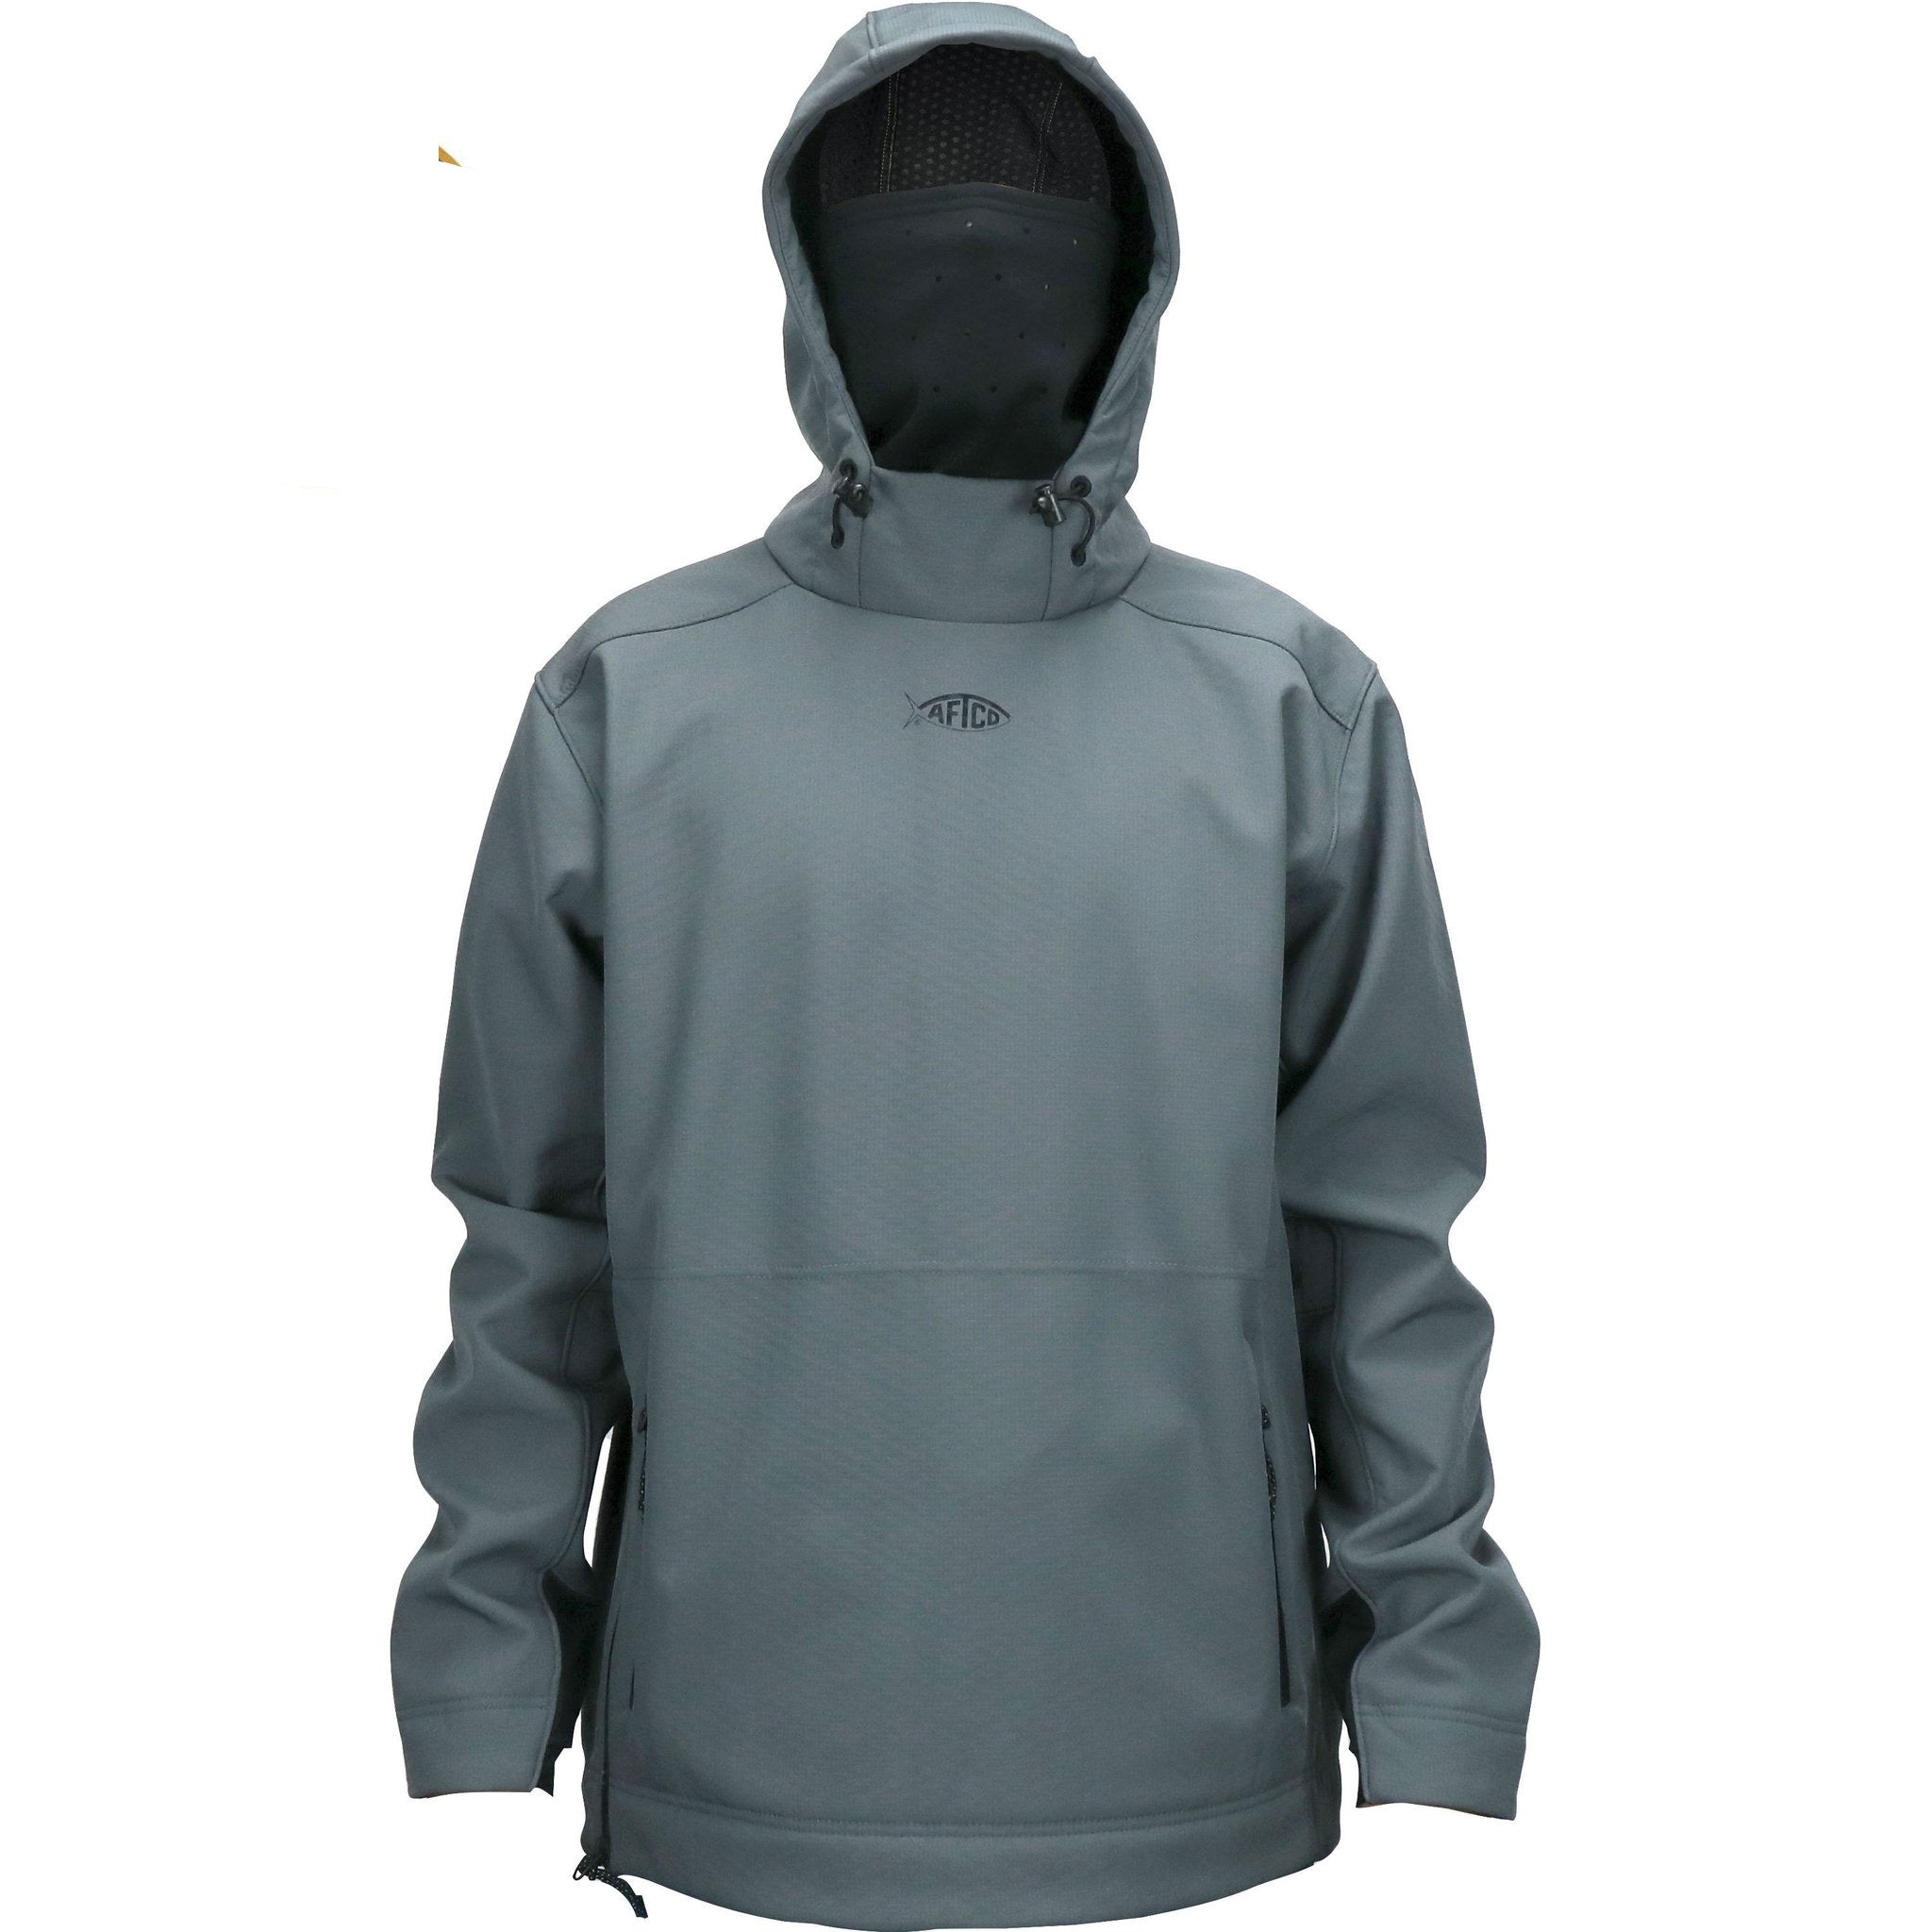 AFTCO Reaper 3-Layer Windproof Softshell Jacket